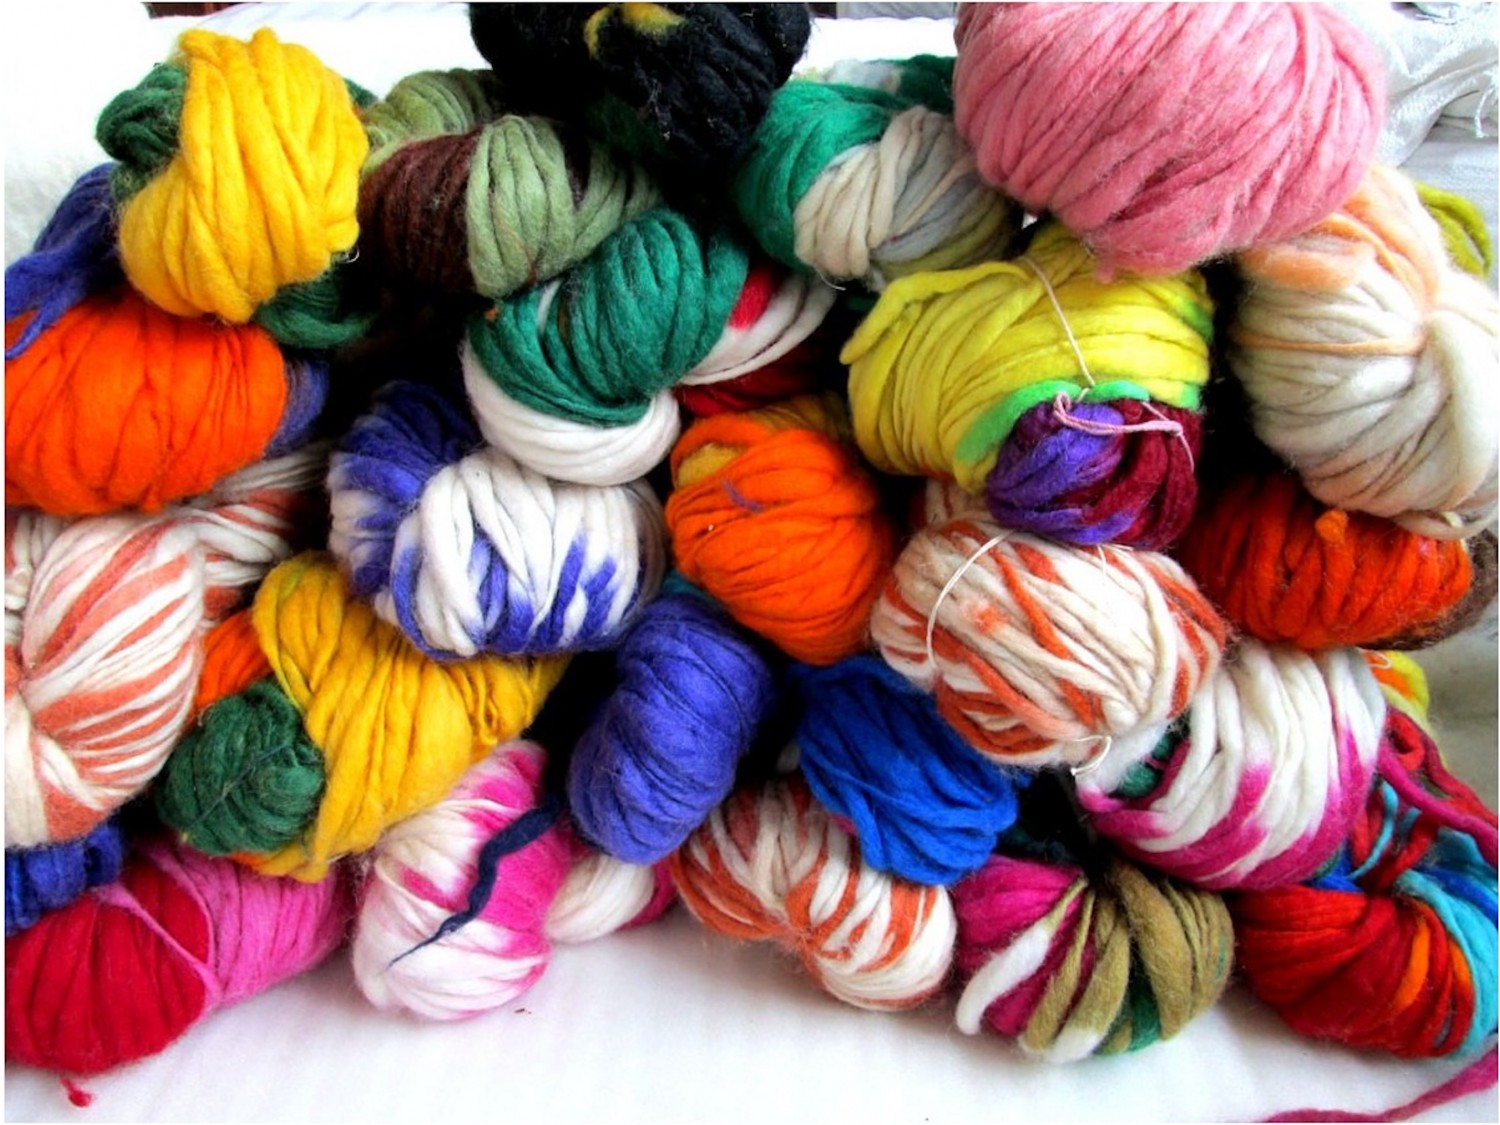 https://www.feltandyarn.com/13553-large_default/mix-color-pure-wool-soft-yarns-from-nepal-.jpg